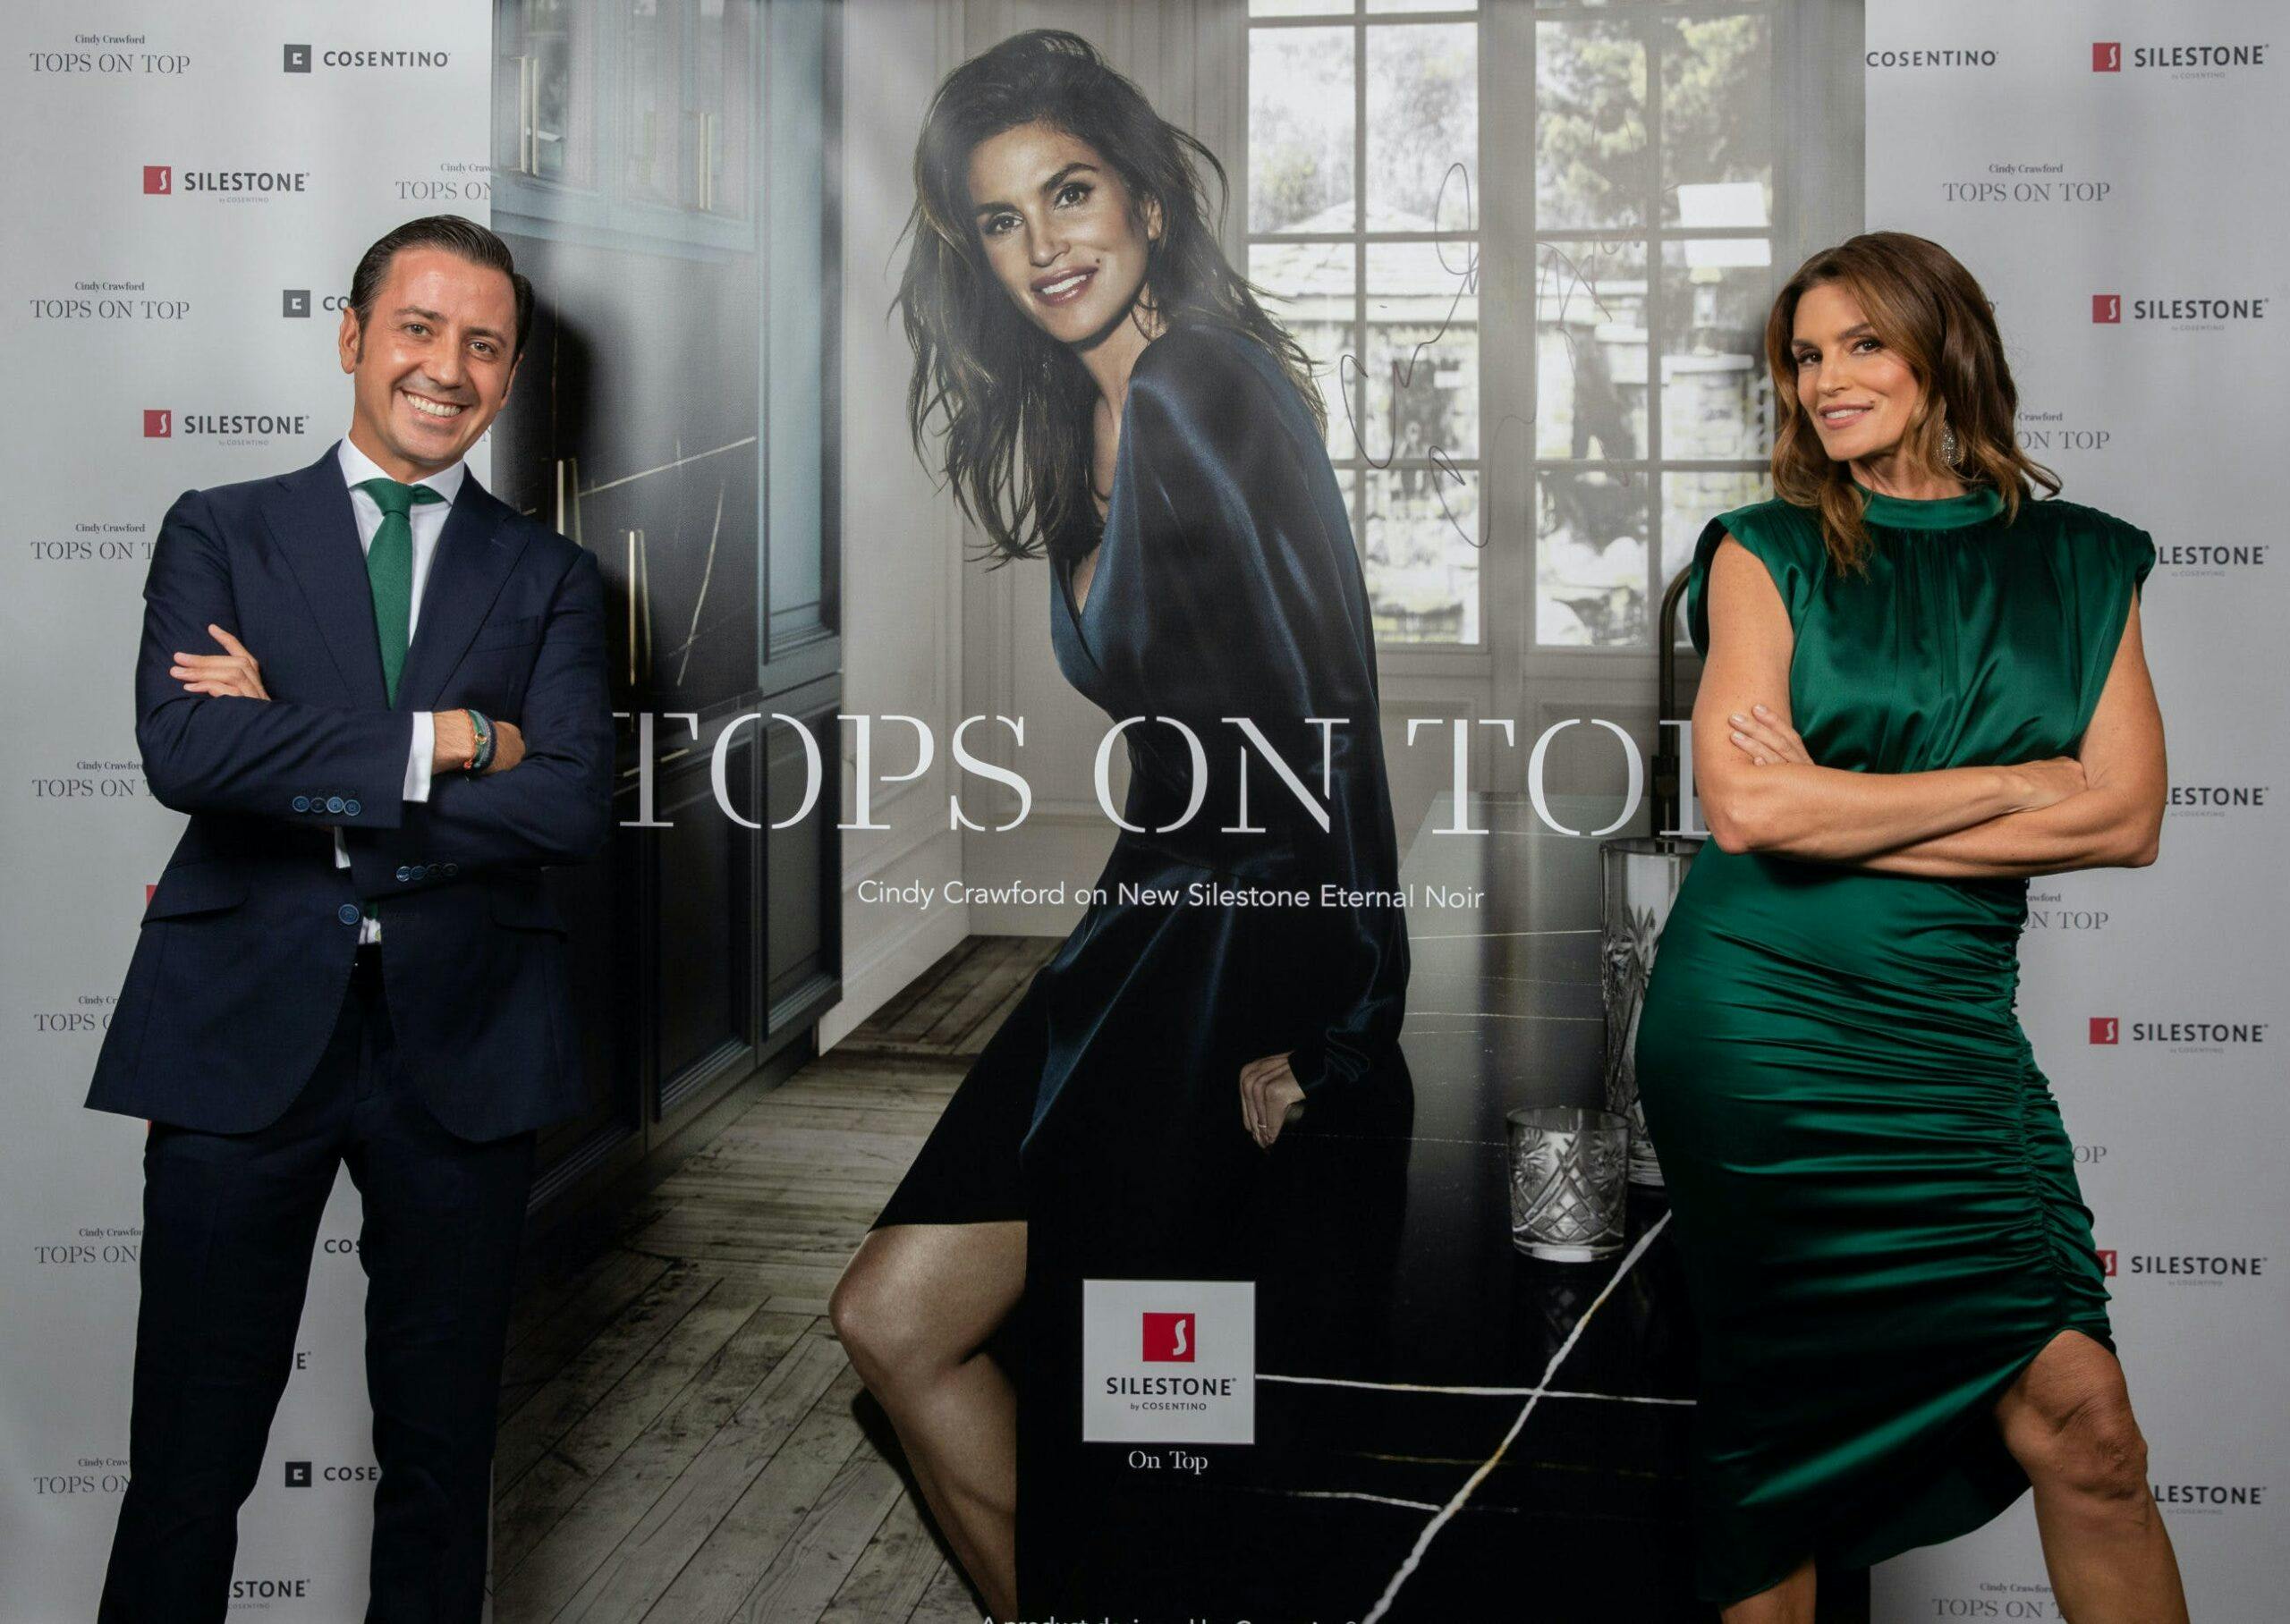 Image 31 of Eduardo Cosentino y Cindy Crawford Tops On Top 2019 Londres 1 scaled in Silestone® Presents its New "Tops on Top 2019" Campaign Featuring Cindy Crawford - Cosentino